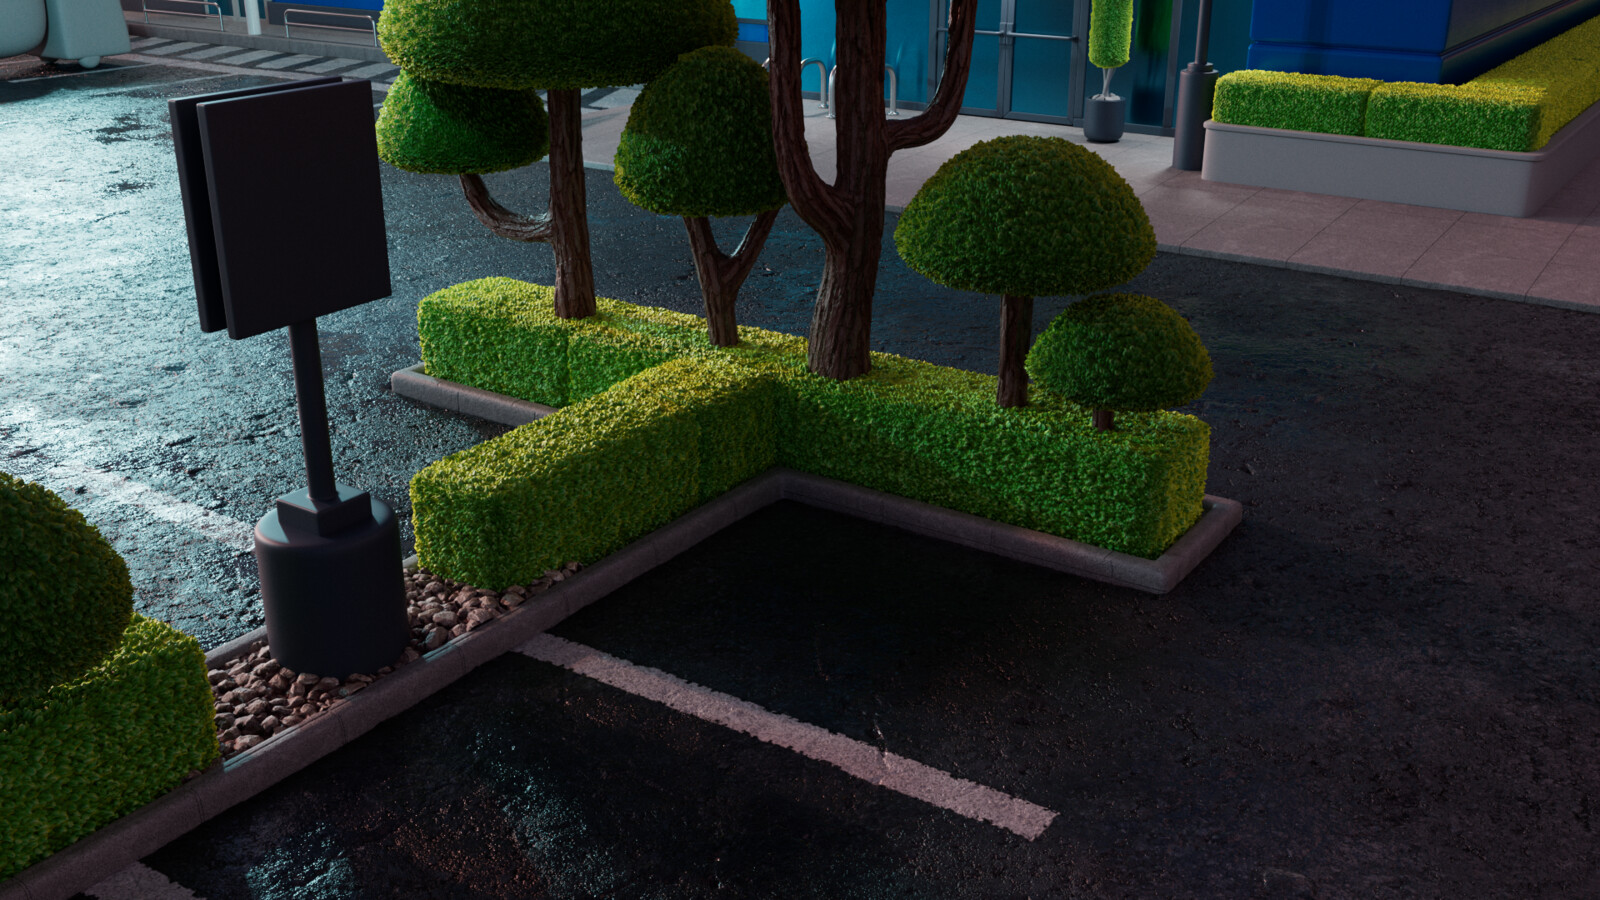 A Close Up on the parking lot assets, to check the vegetation and asphalt substance shaders. 